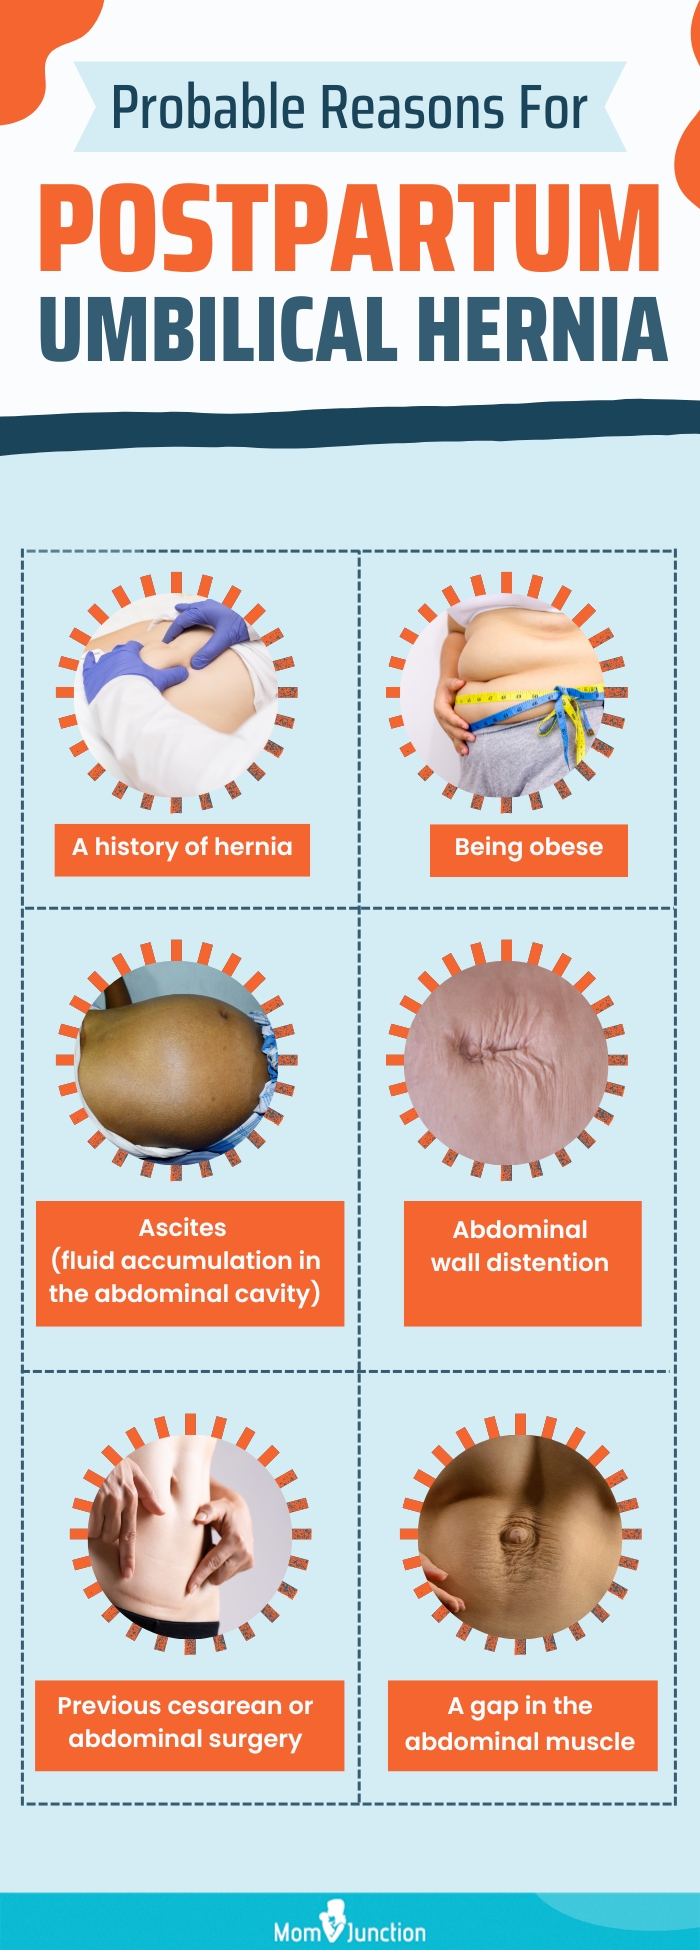 probable reasons for postpartum umbilical hernia (infographic)